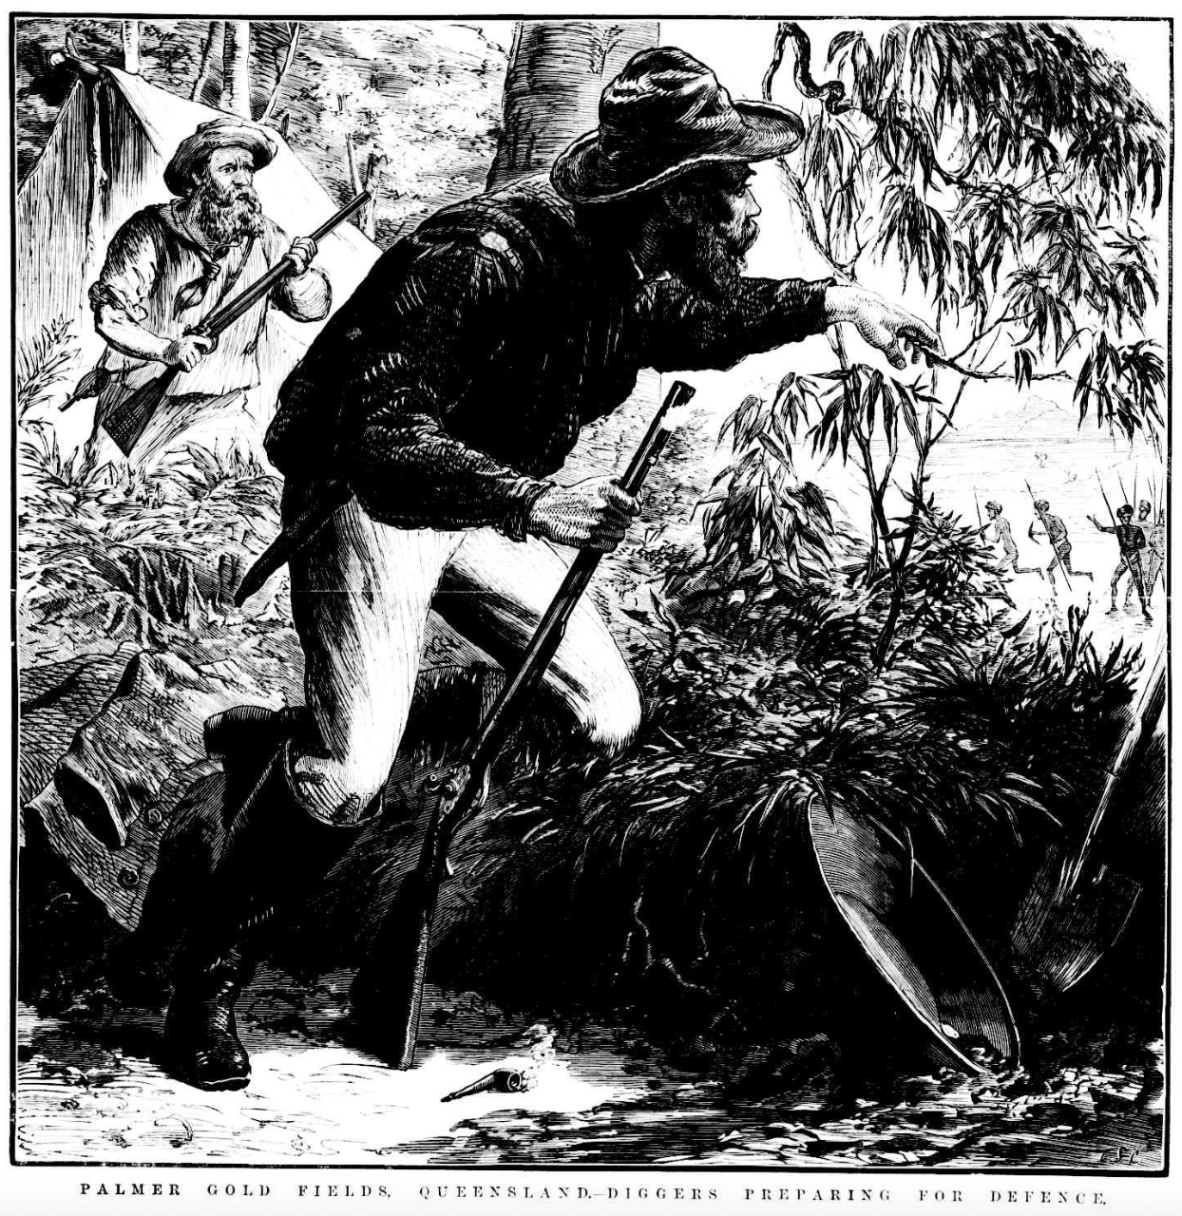 Palmer Gold Field, Queensland. Diggers Preparing for Defence. “The Dangers of the Palmer – A Native Attack.” Illustrated Sydney News and New South Wales Agriculturalist and Grazier, 22 Jul. 1876, p. 14